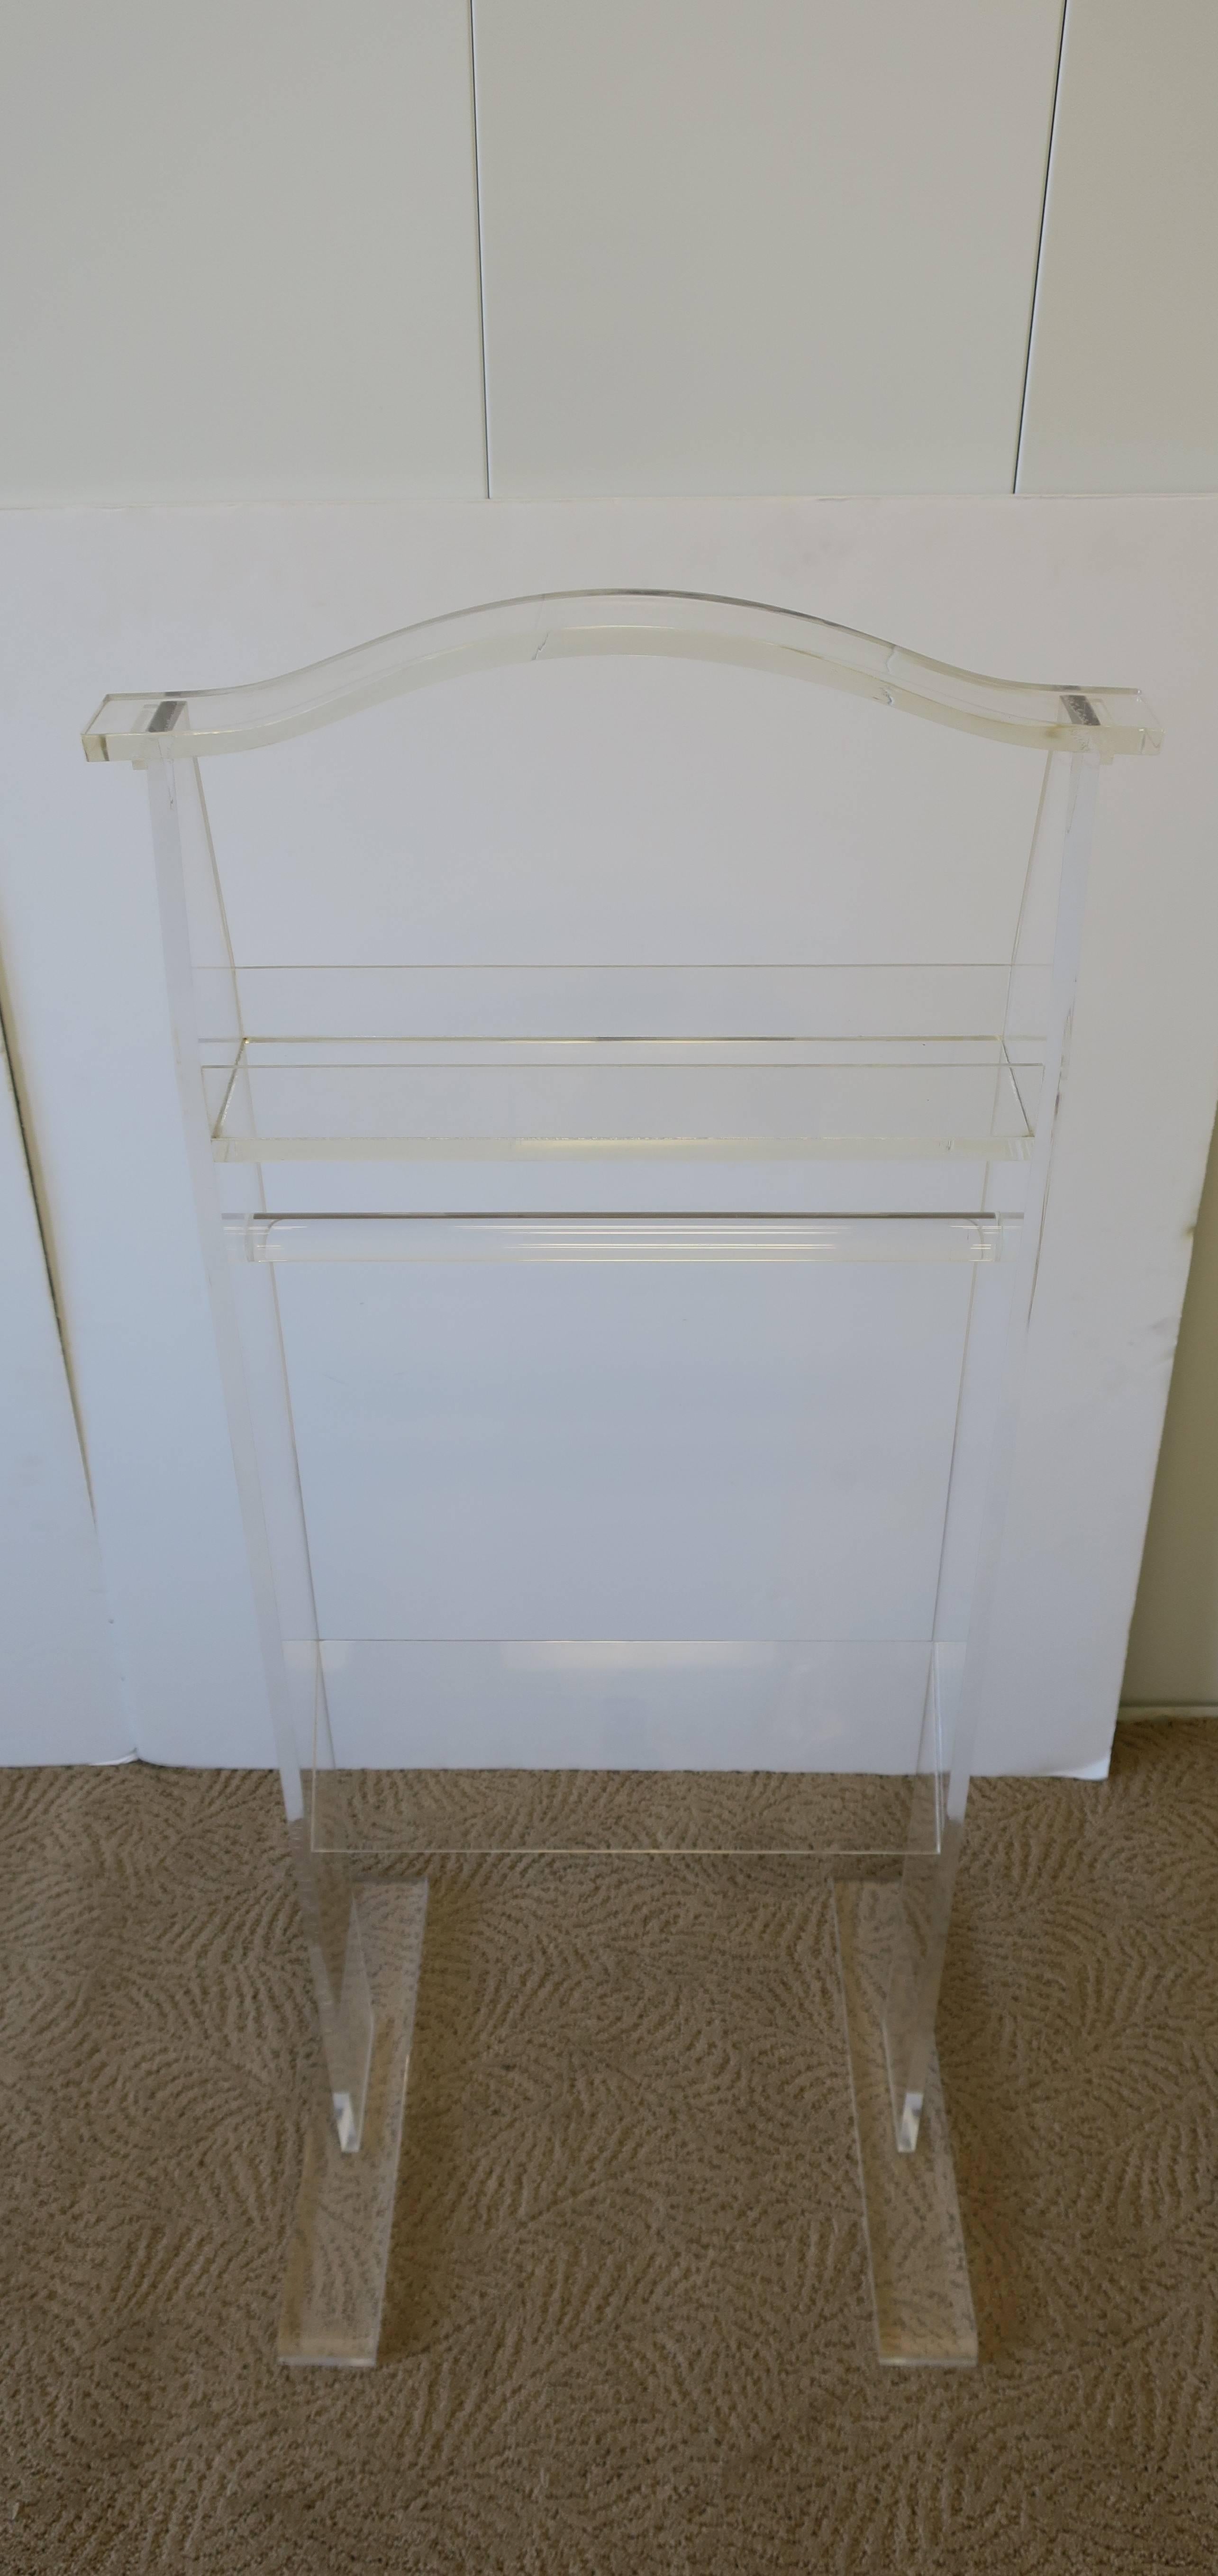 A substantial vintage Lucite clothing valet. Valet is designed to hold a jacket/top, pants (on Lucite bar), a pair of shoes, and an area to hold smaller items such as a watch, jewelry, phone, keys, etc., as show in images. Valet is circa 1970s or